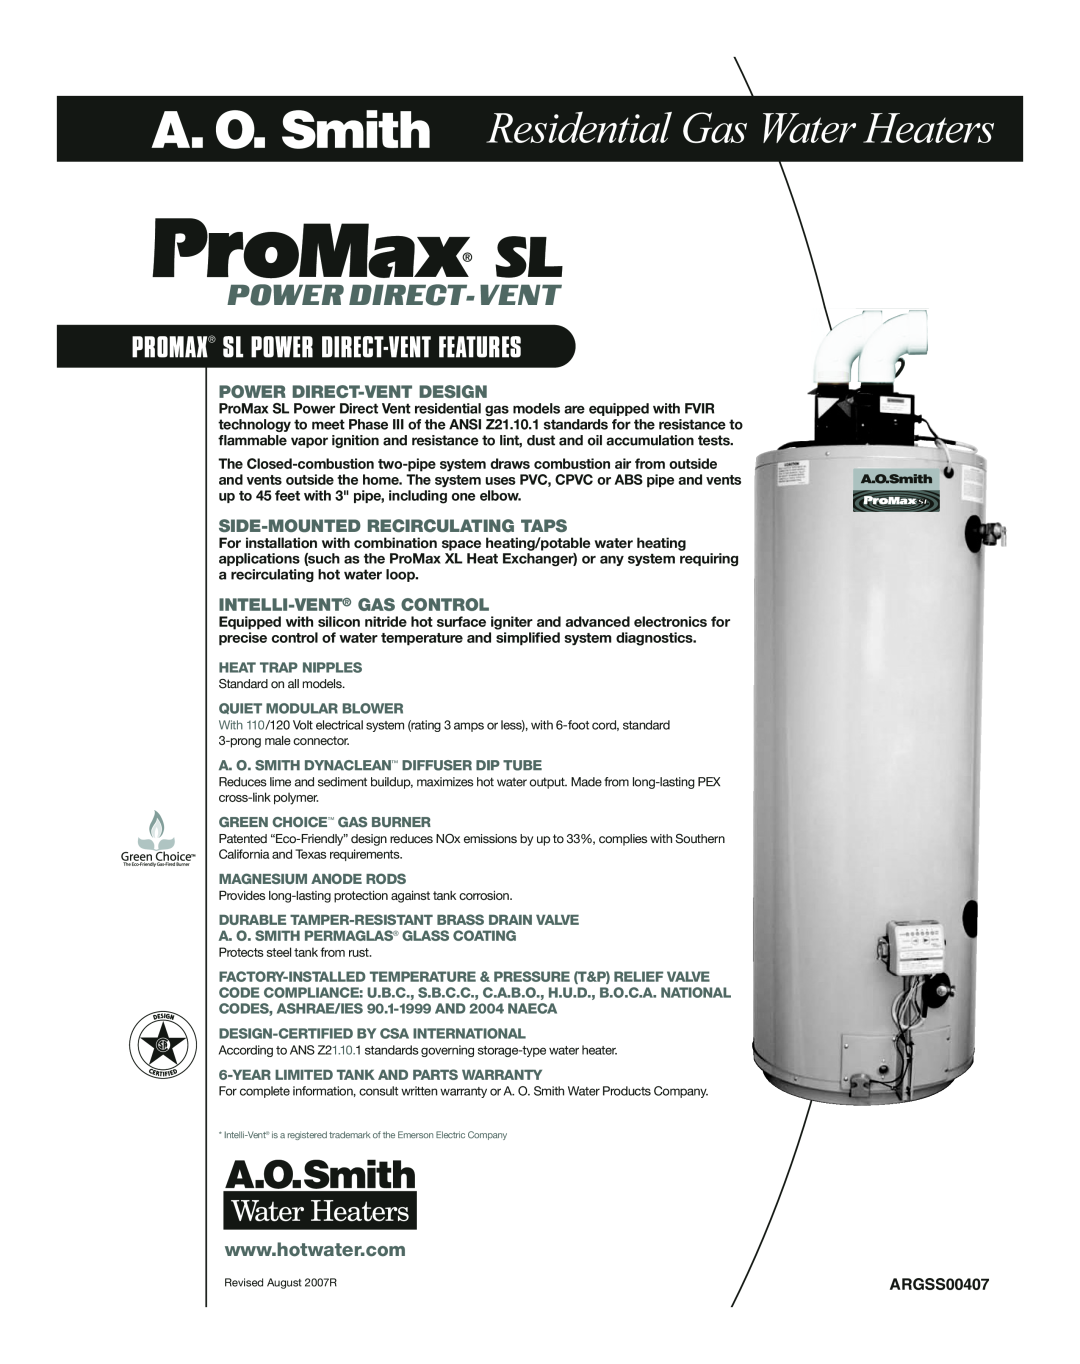 A.O. Smith SL warranty Residential Gas Water Heaters, ARGSS00407, Promax Sl Power Direct-Vent Features 